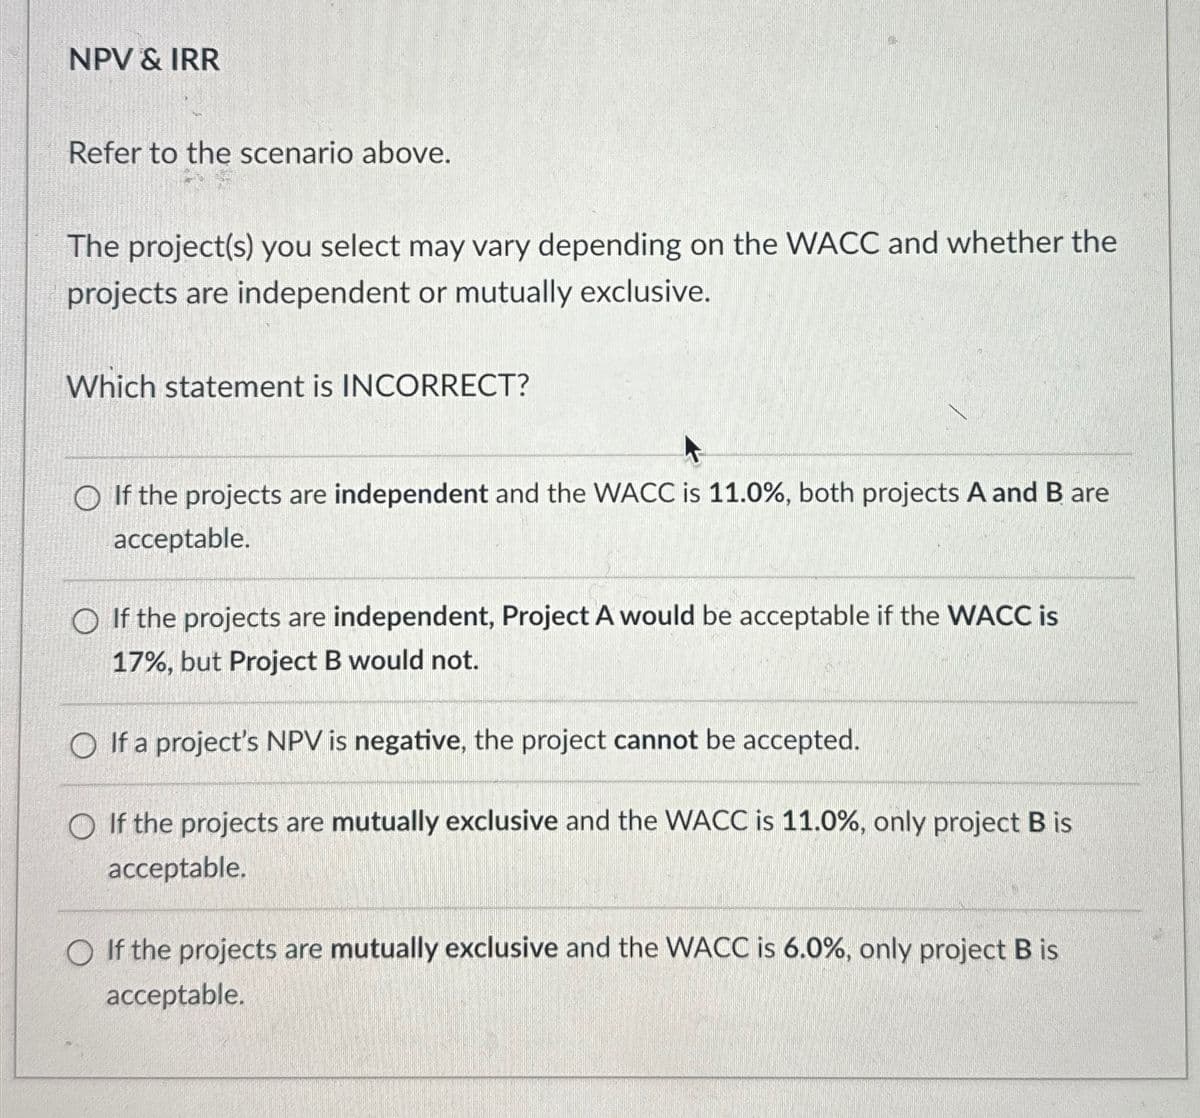 NPV & IRR
Refer to the scenario above.
The project(s) you select may vary depending on the WACC and whether the
projects are independent or mutually exclusive.
Which statement is INCORRECT?
If the projects are independent and the WACC is 11.0%, both projects A and B are
acceptable.
If the projects are independent, Project A would be acceptable if the WACC is
17%, but Project B would not.
If a project's NPV is negative, the project cannot be accepted.
If the projects are mutually exclusive and the WACC is 11.0%, only project B is
acceptable.
If the projects are mutually exclusive and the WACC is 6.0%, only project B is
acceptable.